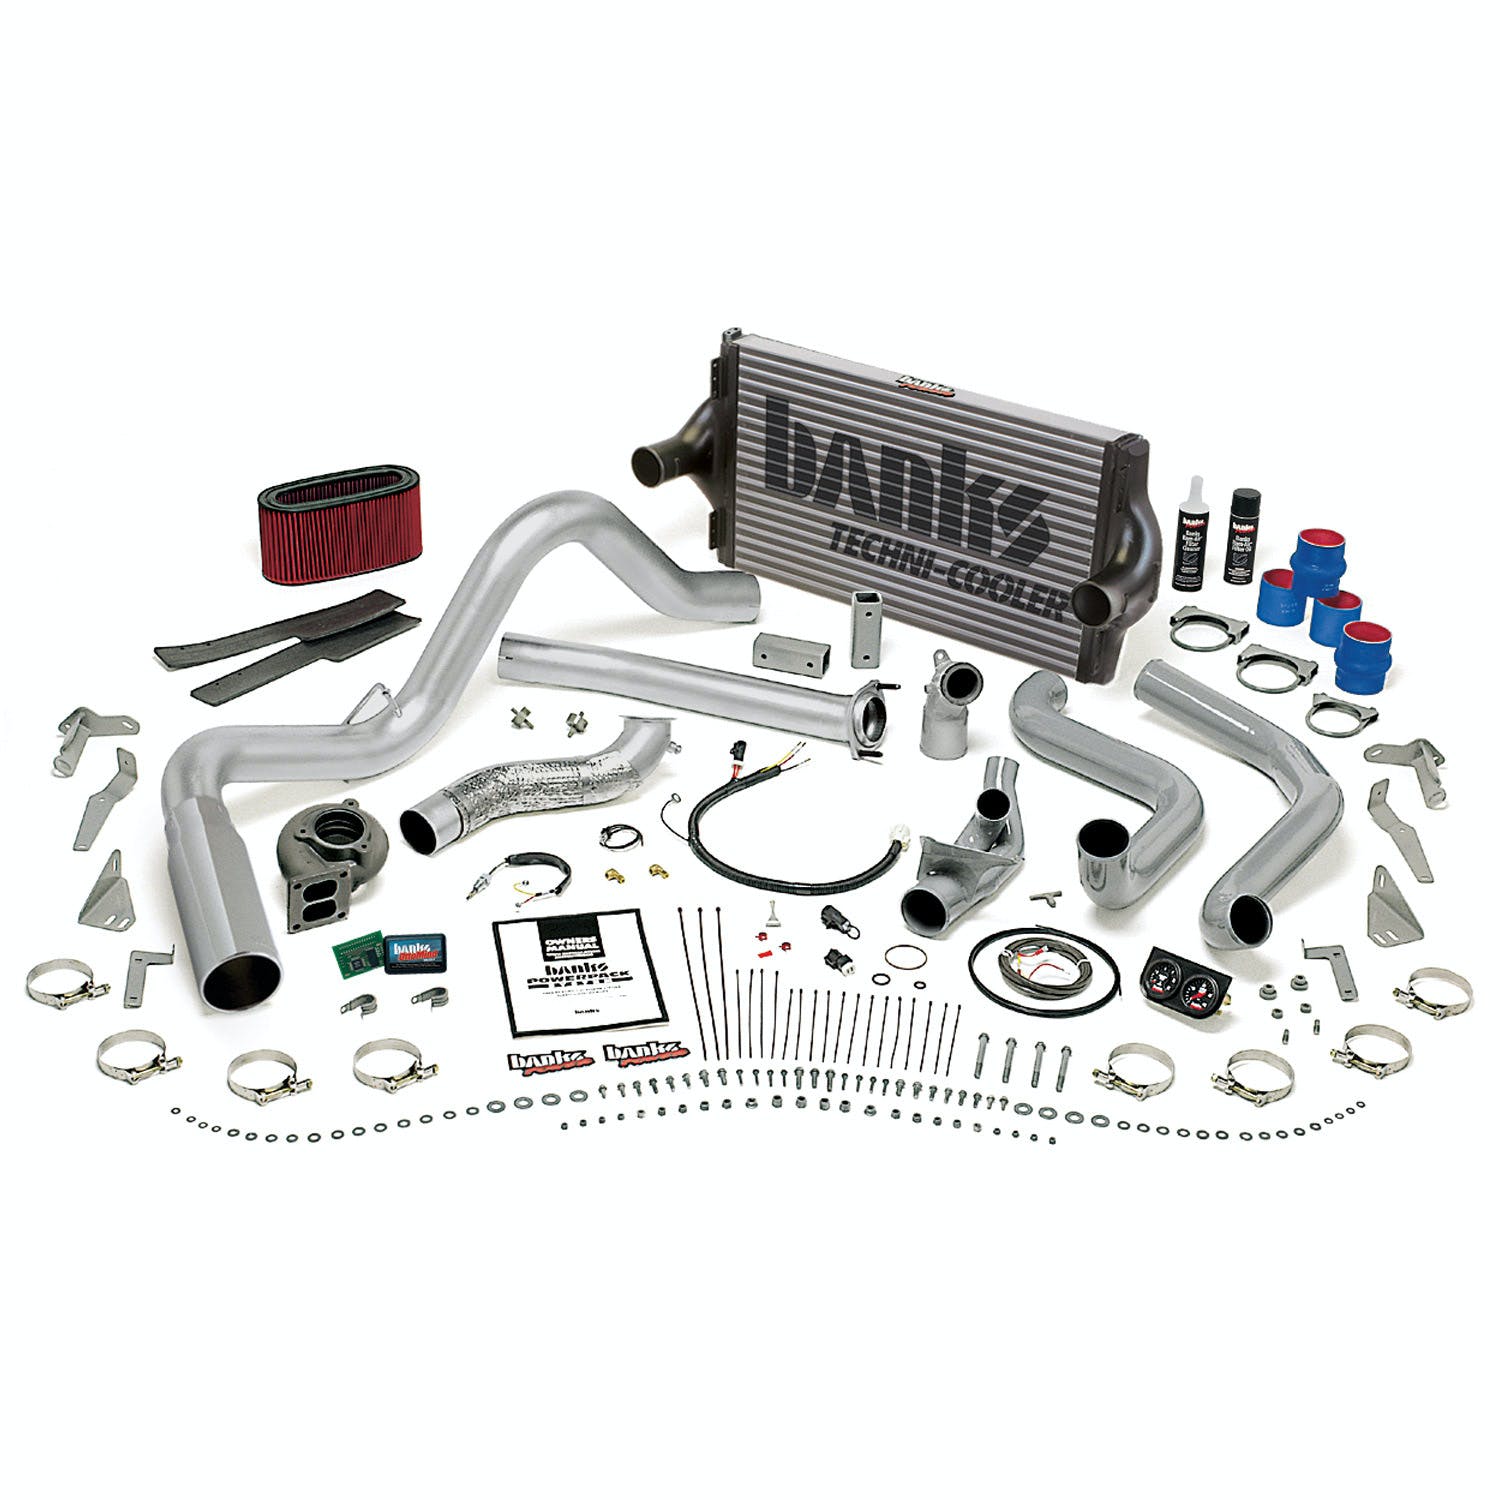 Banks Power 48562 Powerpack System-1995 1/2-97 Ford 7.3L; Man